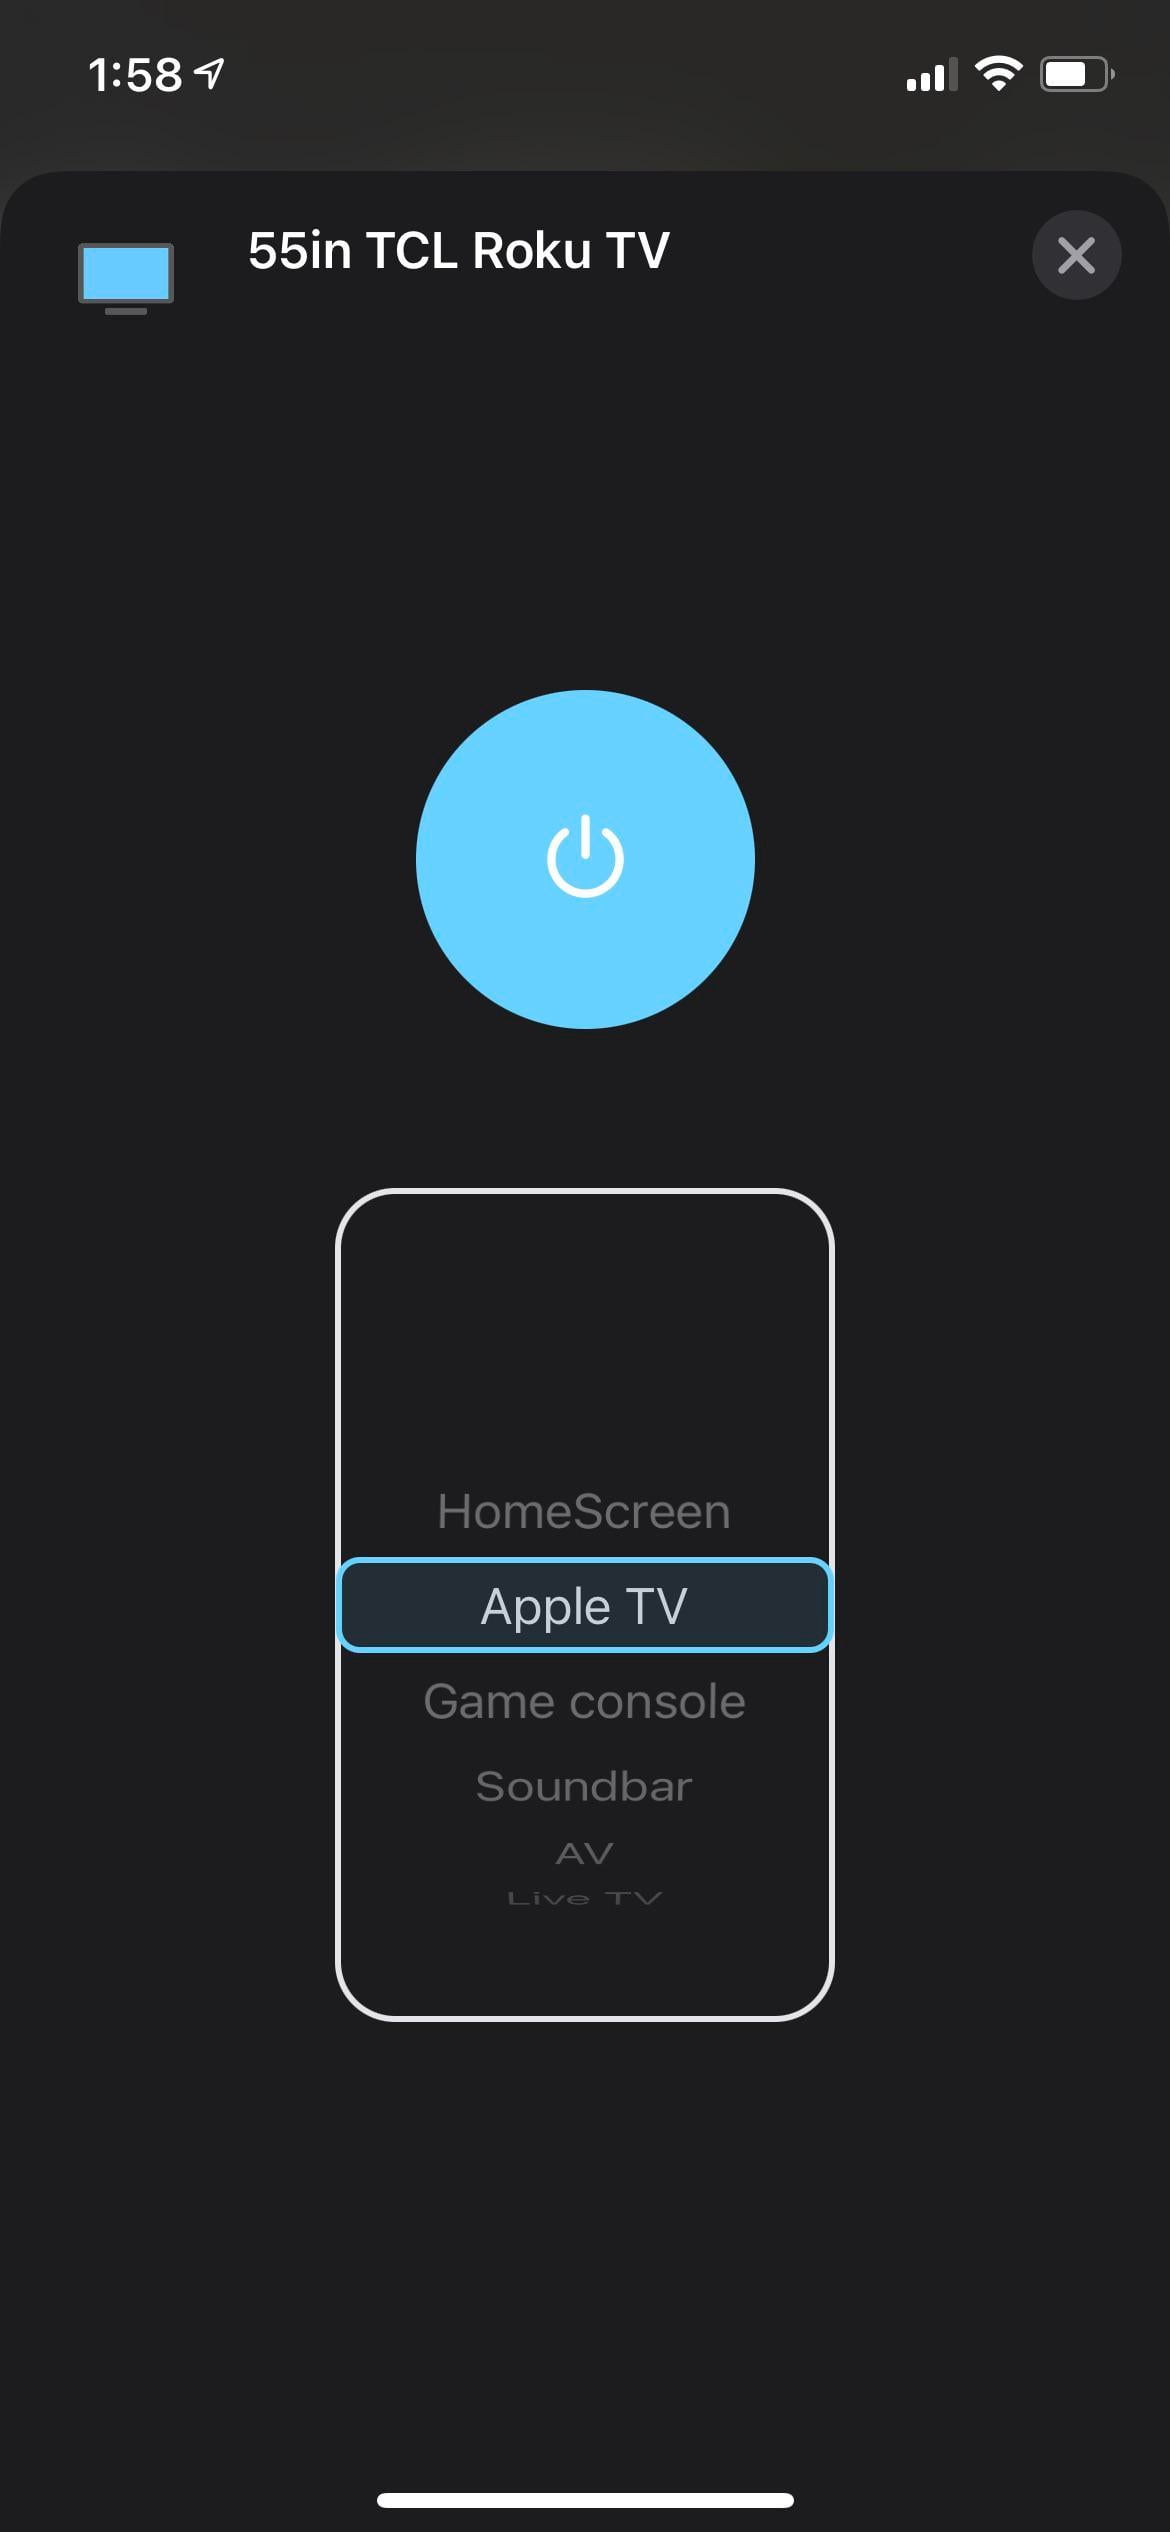 TCL Roku TV just got HomeKit support Wowww Excited for